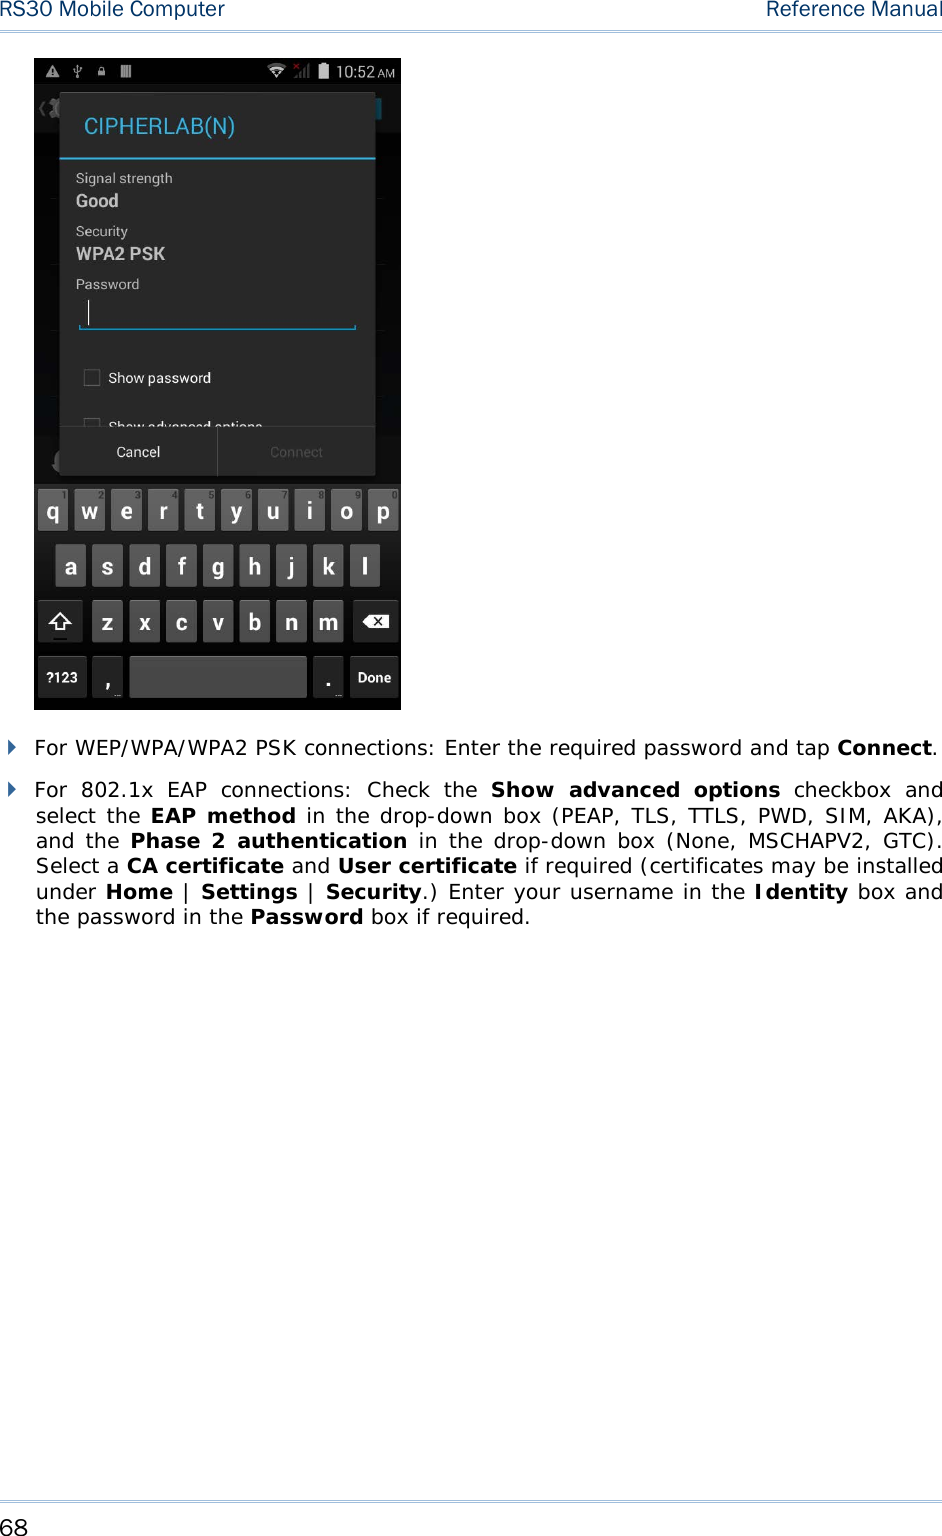 RS30 Mobile Computer    Reference Manual    For WEP/WPA/WPA2 PSK connections: Enter the required password and tap Connect.  For  802.1x EAP connections:  Check the  Show advanced options checkbox and select the EAP method in the drop-down box (PEAP, TLS, TTLS, PWD, SIM, AKA), and the Phase 2 authentication in the drop-down box (None, MSCHAPV2, GTC). Select a CA certificate and User certificate if required (certificates may be installed under Home | Settings | Security.) Enter your username in the Identity box and the password in the Password box if required. 68 